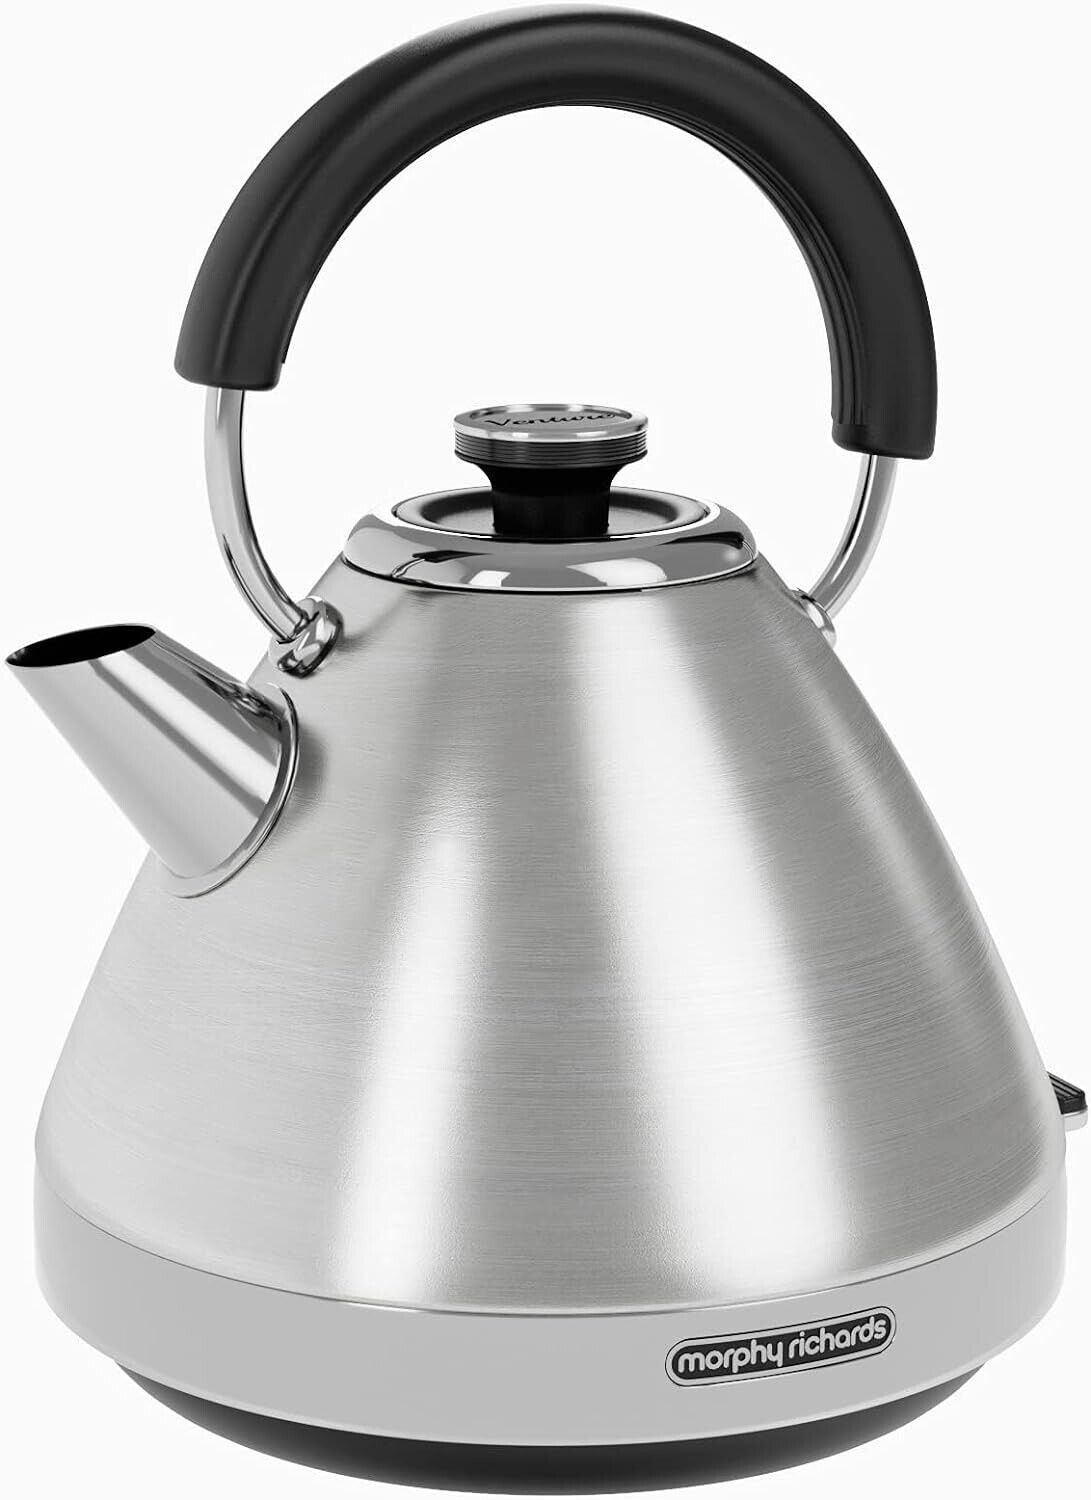 Morphy Richards Venture Brushed Steel 1.5L 3KW Silver Pyramid Kettle 100130